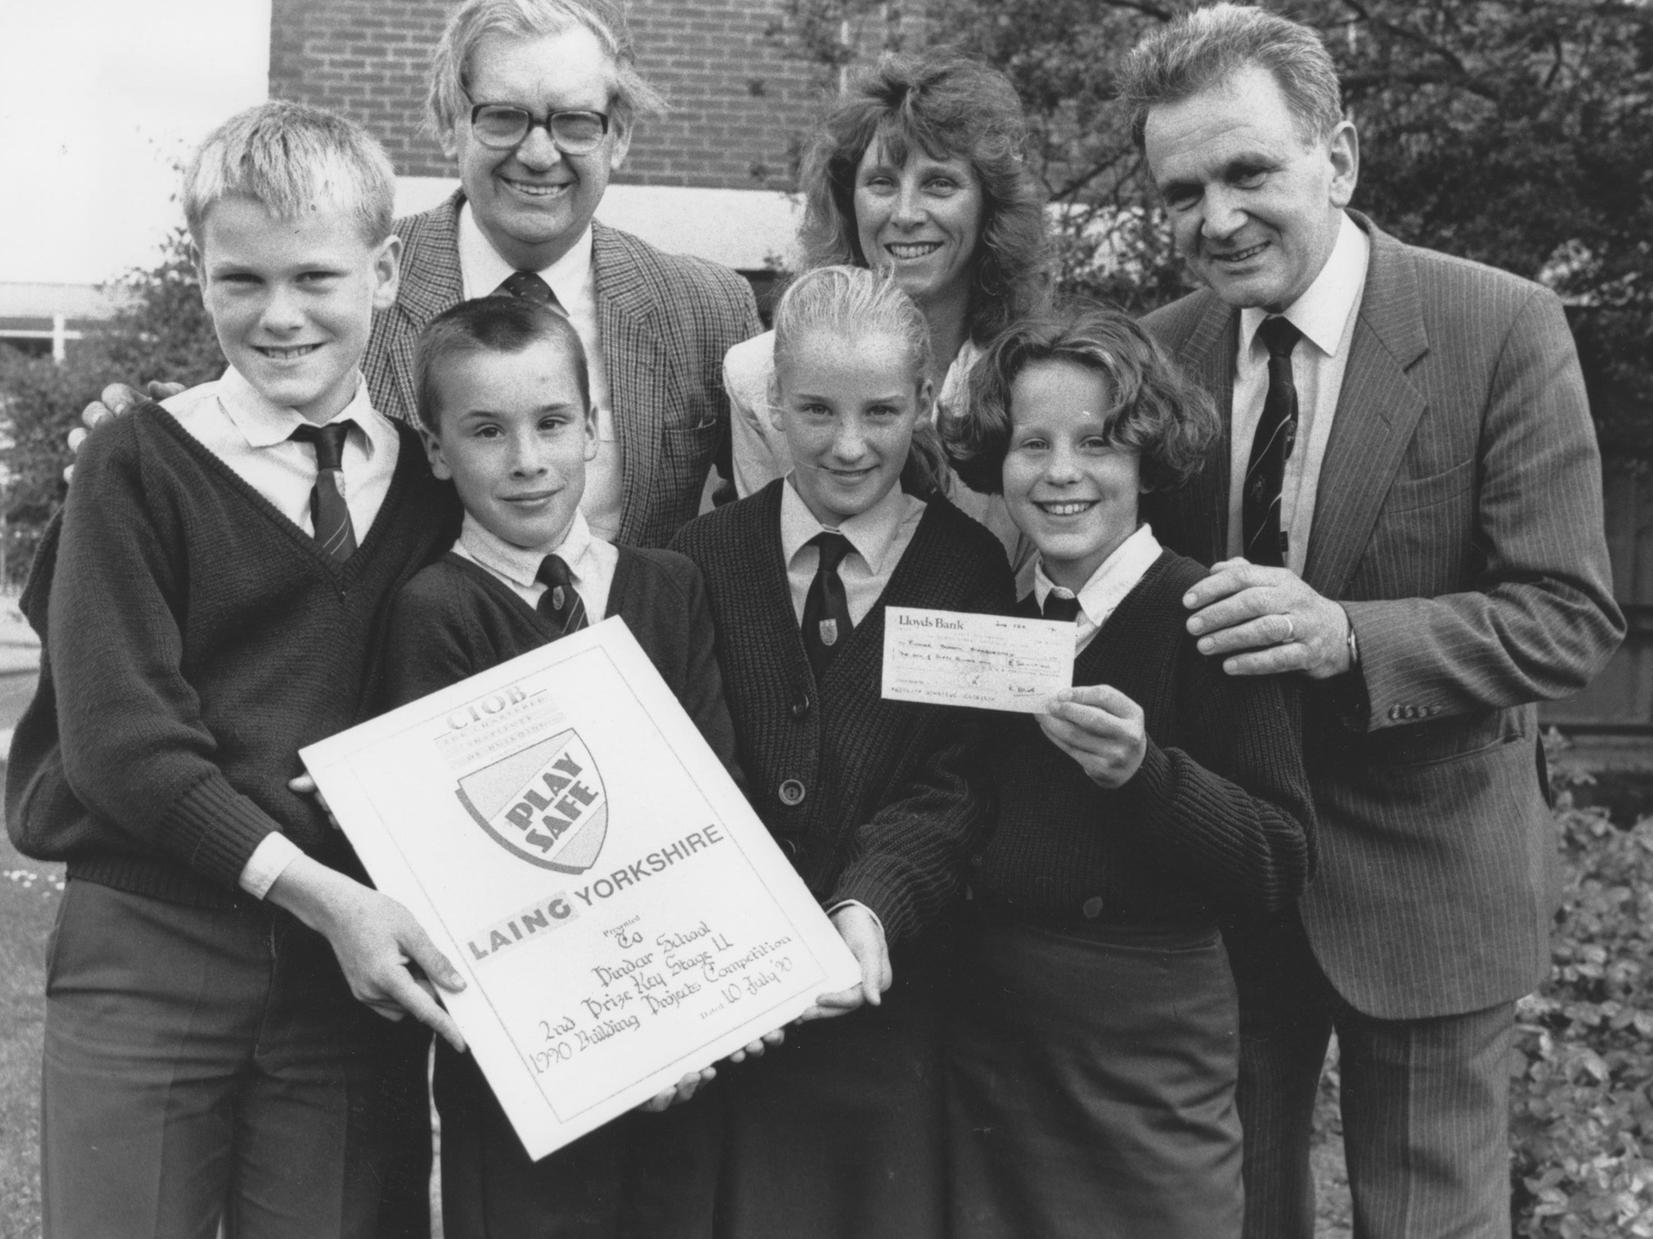 Pindar School came second in a building projects competition in 1990. The award was presented by Jane Preston, back centre, a member of the Construction Industry Training Board, and Bill Bethon, back left, the Regional Executive of the Chartered Institute of Building. They are joined by Cliff Hullah, back right, Head of CDT, and pupils, front, Chris Redford, Richard Evans, Laura Wilson and Rebecca Marsay.